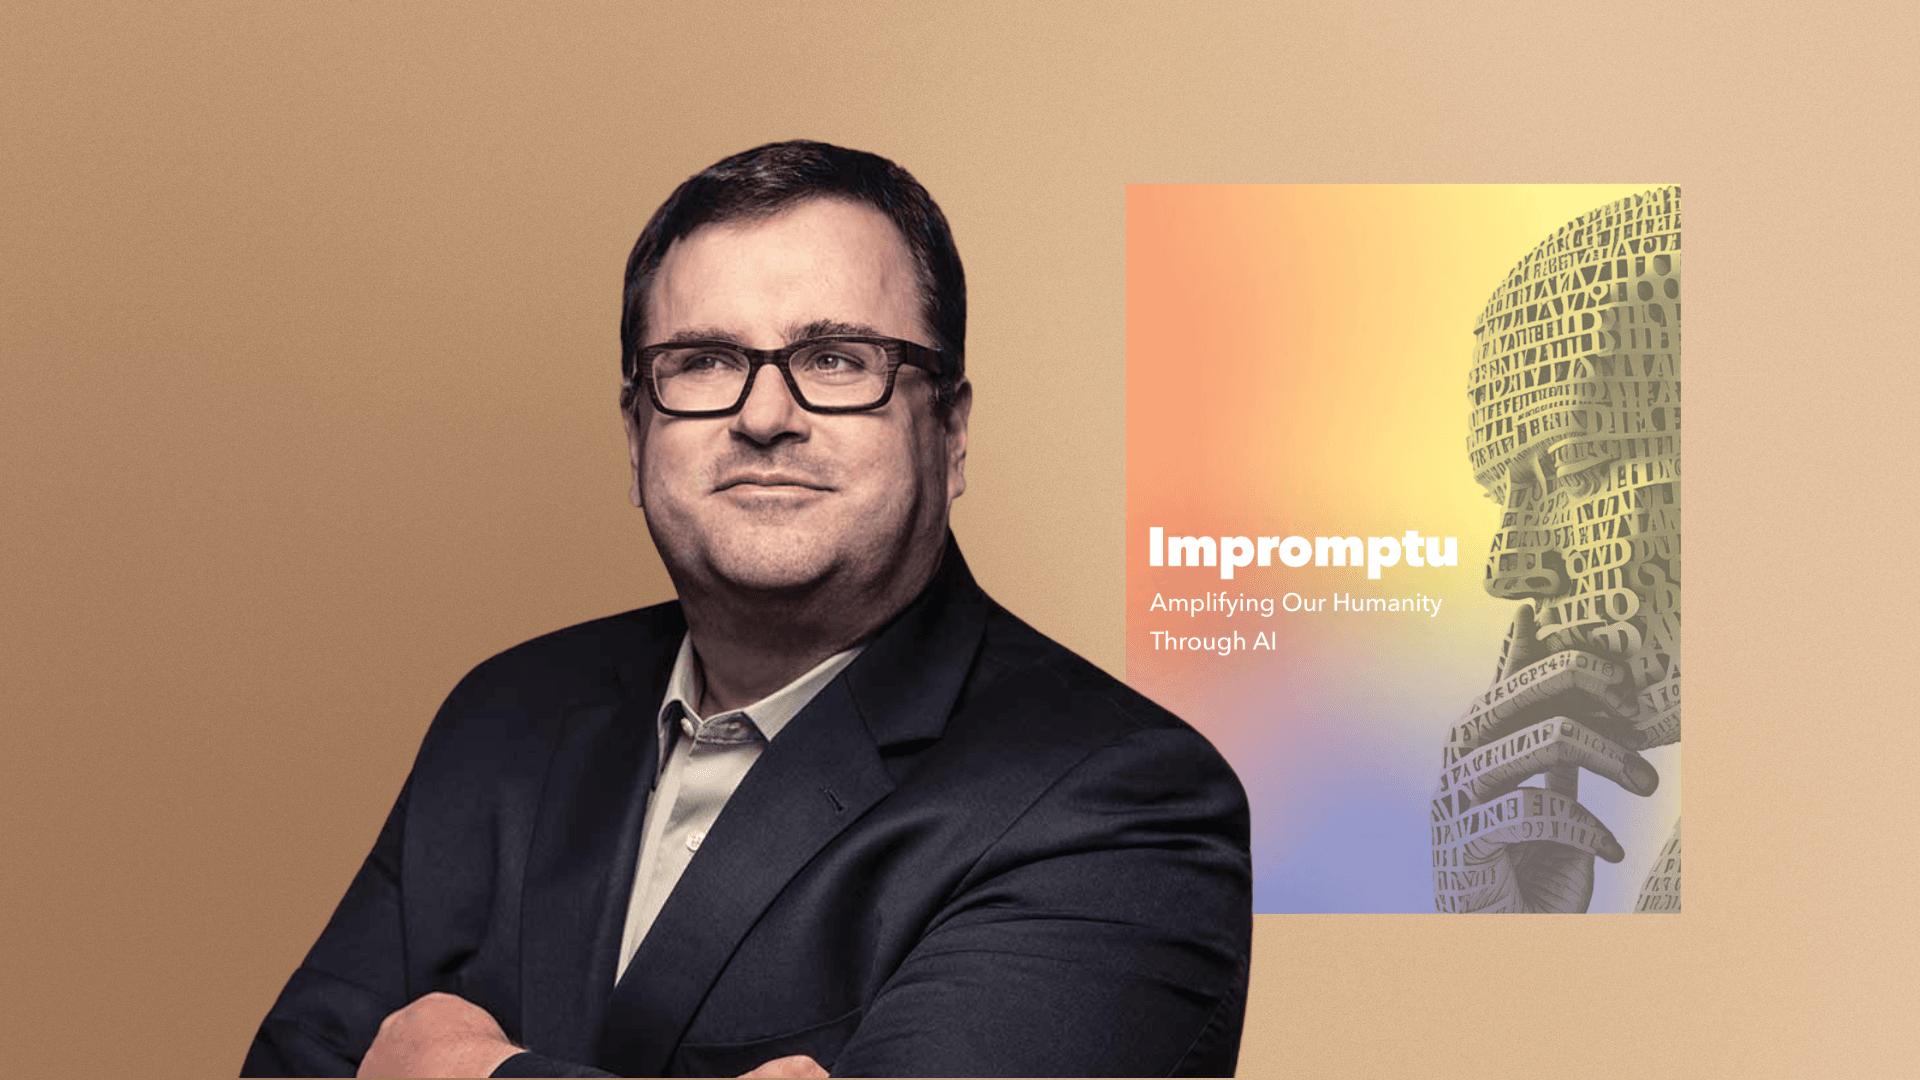  LinkedIn Co-Founder Reid Hoffman Presents ‘Impromptu’ The First Ever Book Written With GPT-4